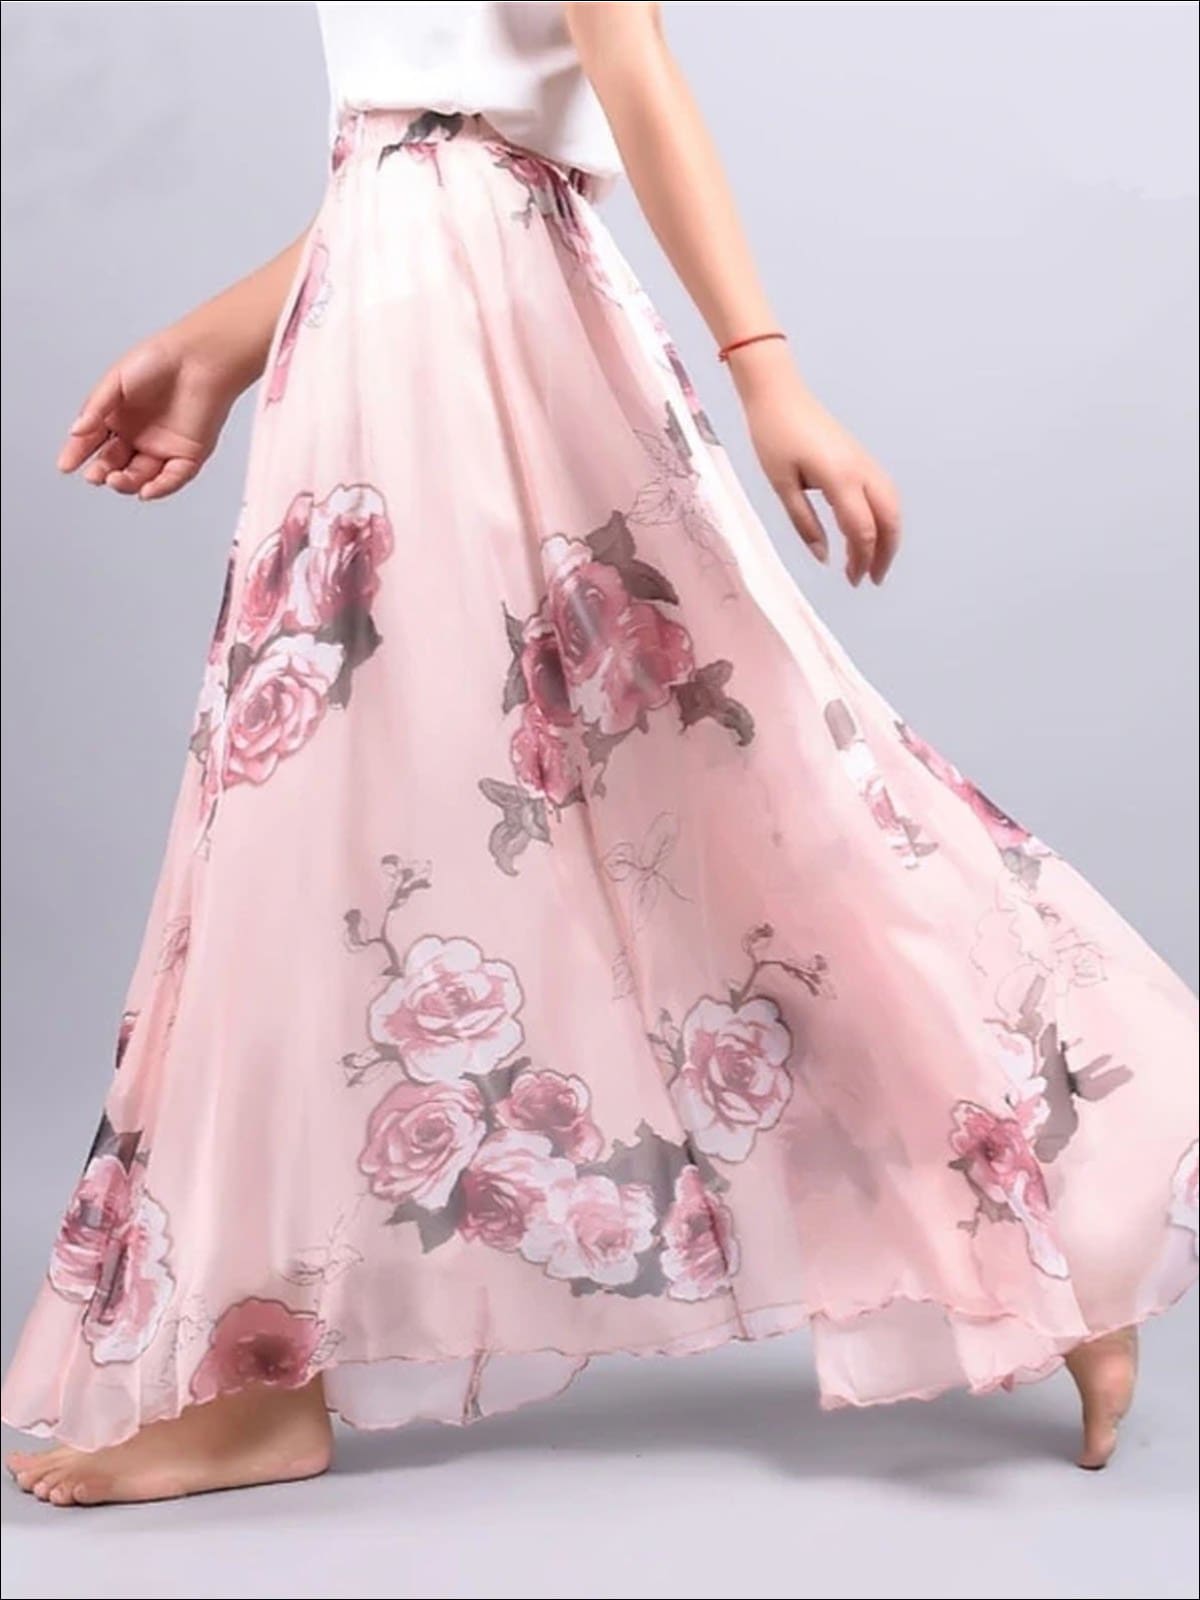 Womens Loose Flare Floral Maxi Skirt - Womens Bottoms